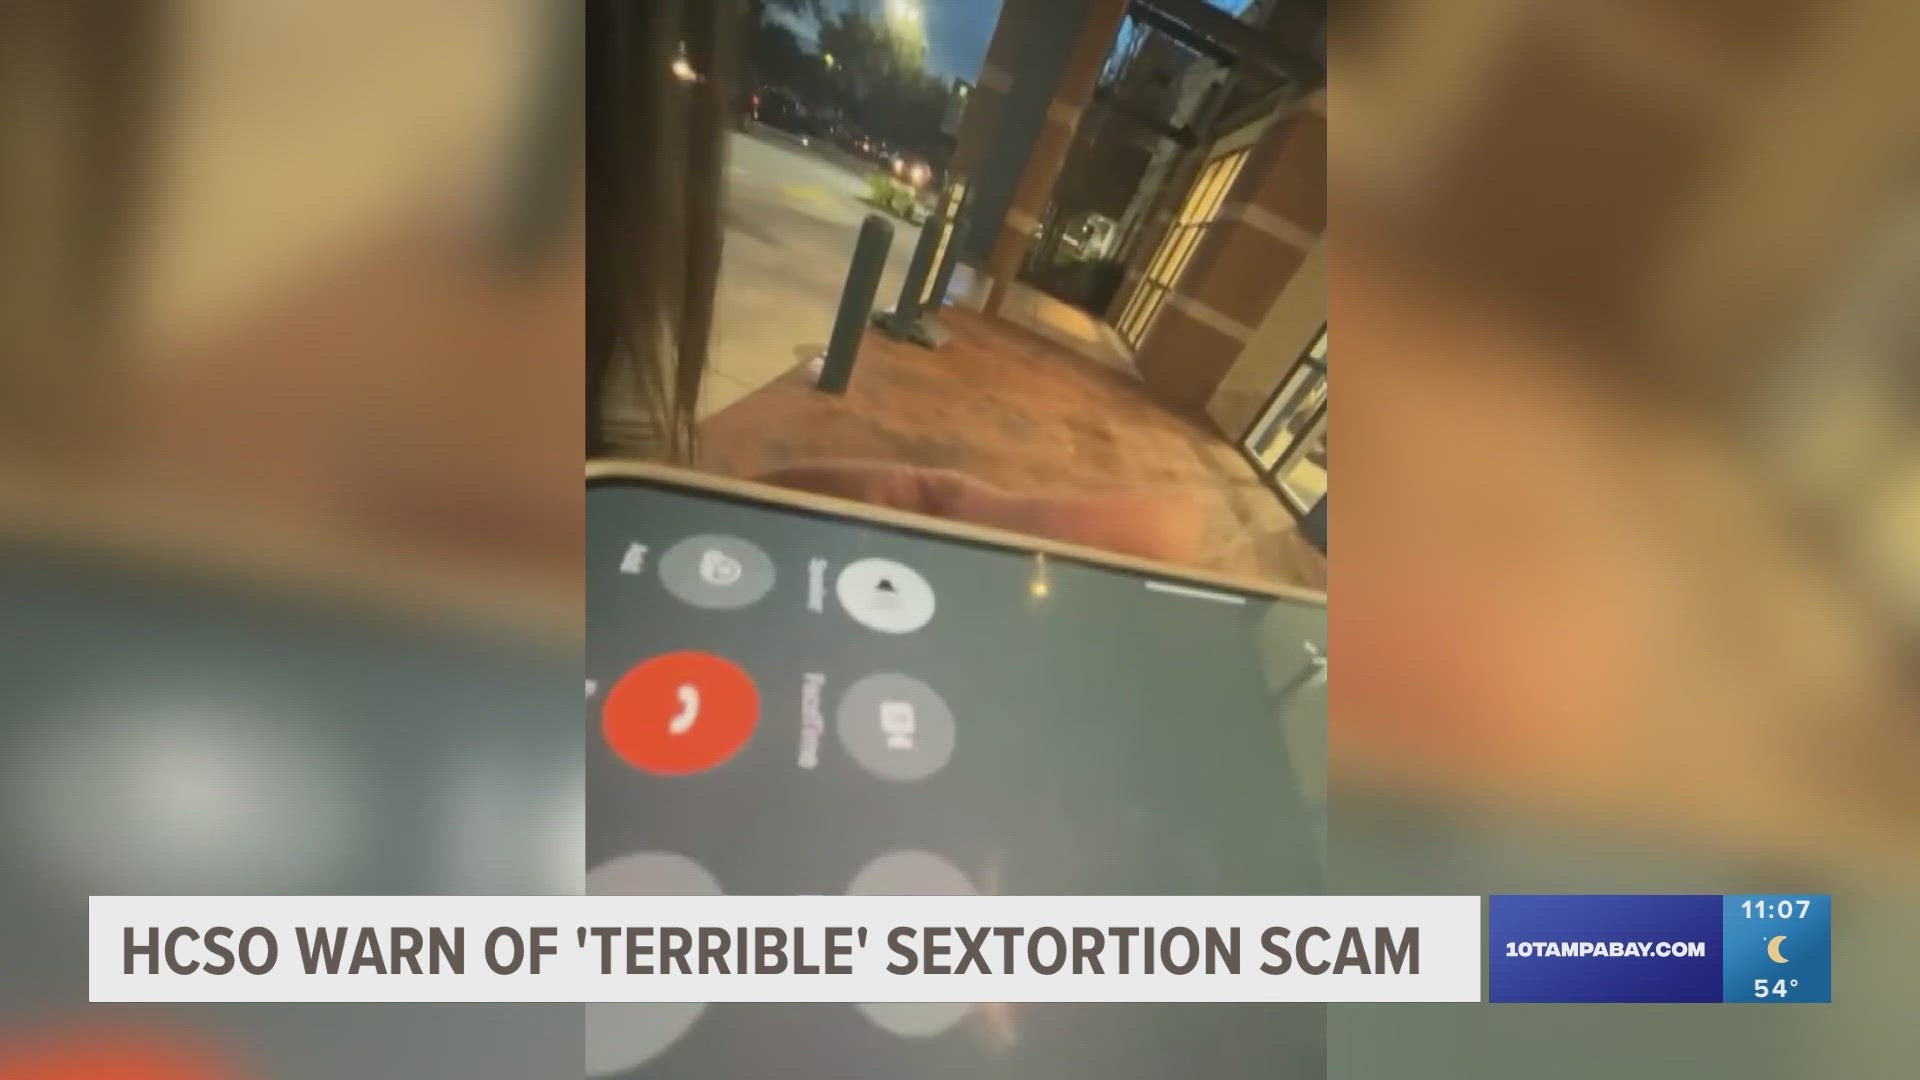 The HCSO said there have been victims who fell for this scam, including a 17-year-old who sent scammers a video of herself having sex following cyber threats.